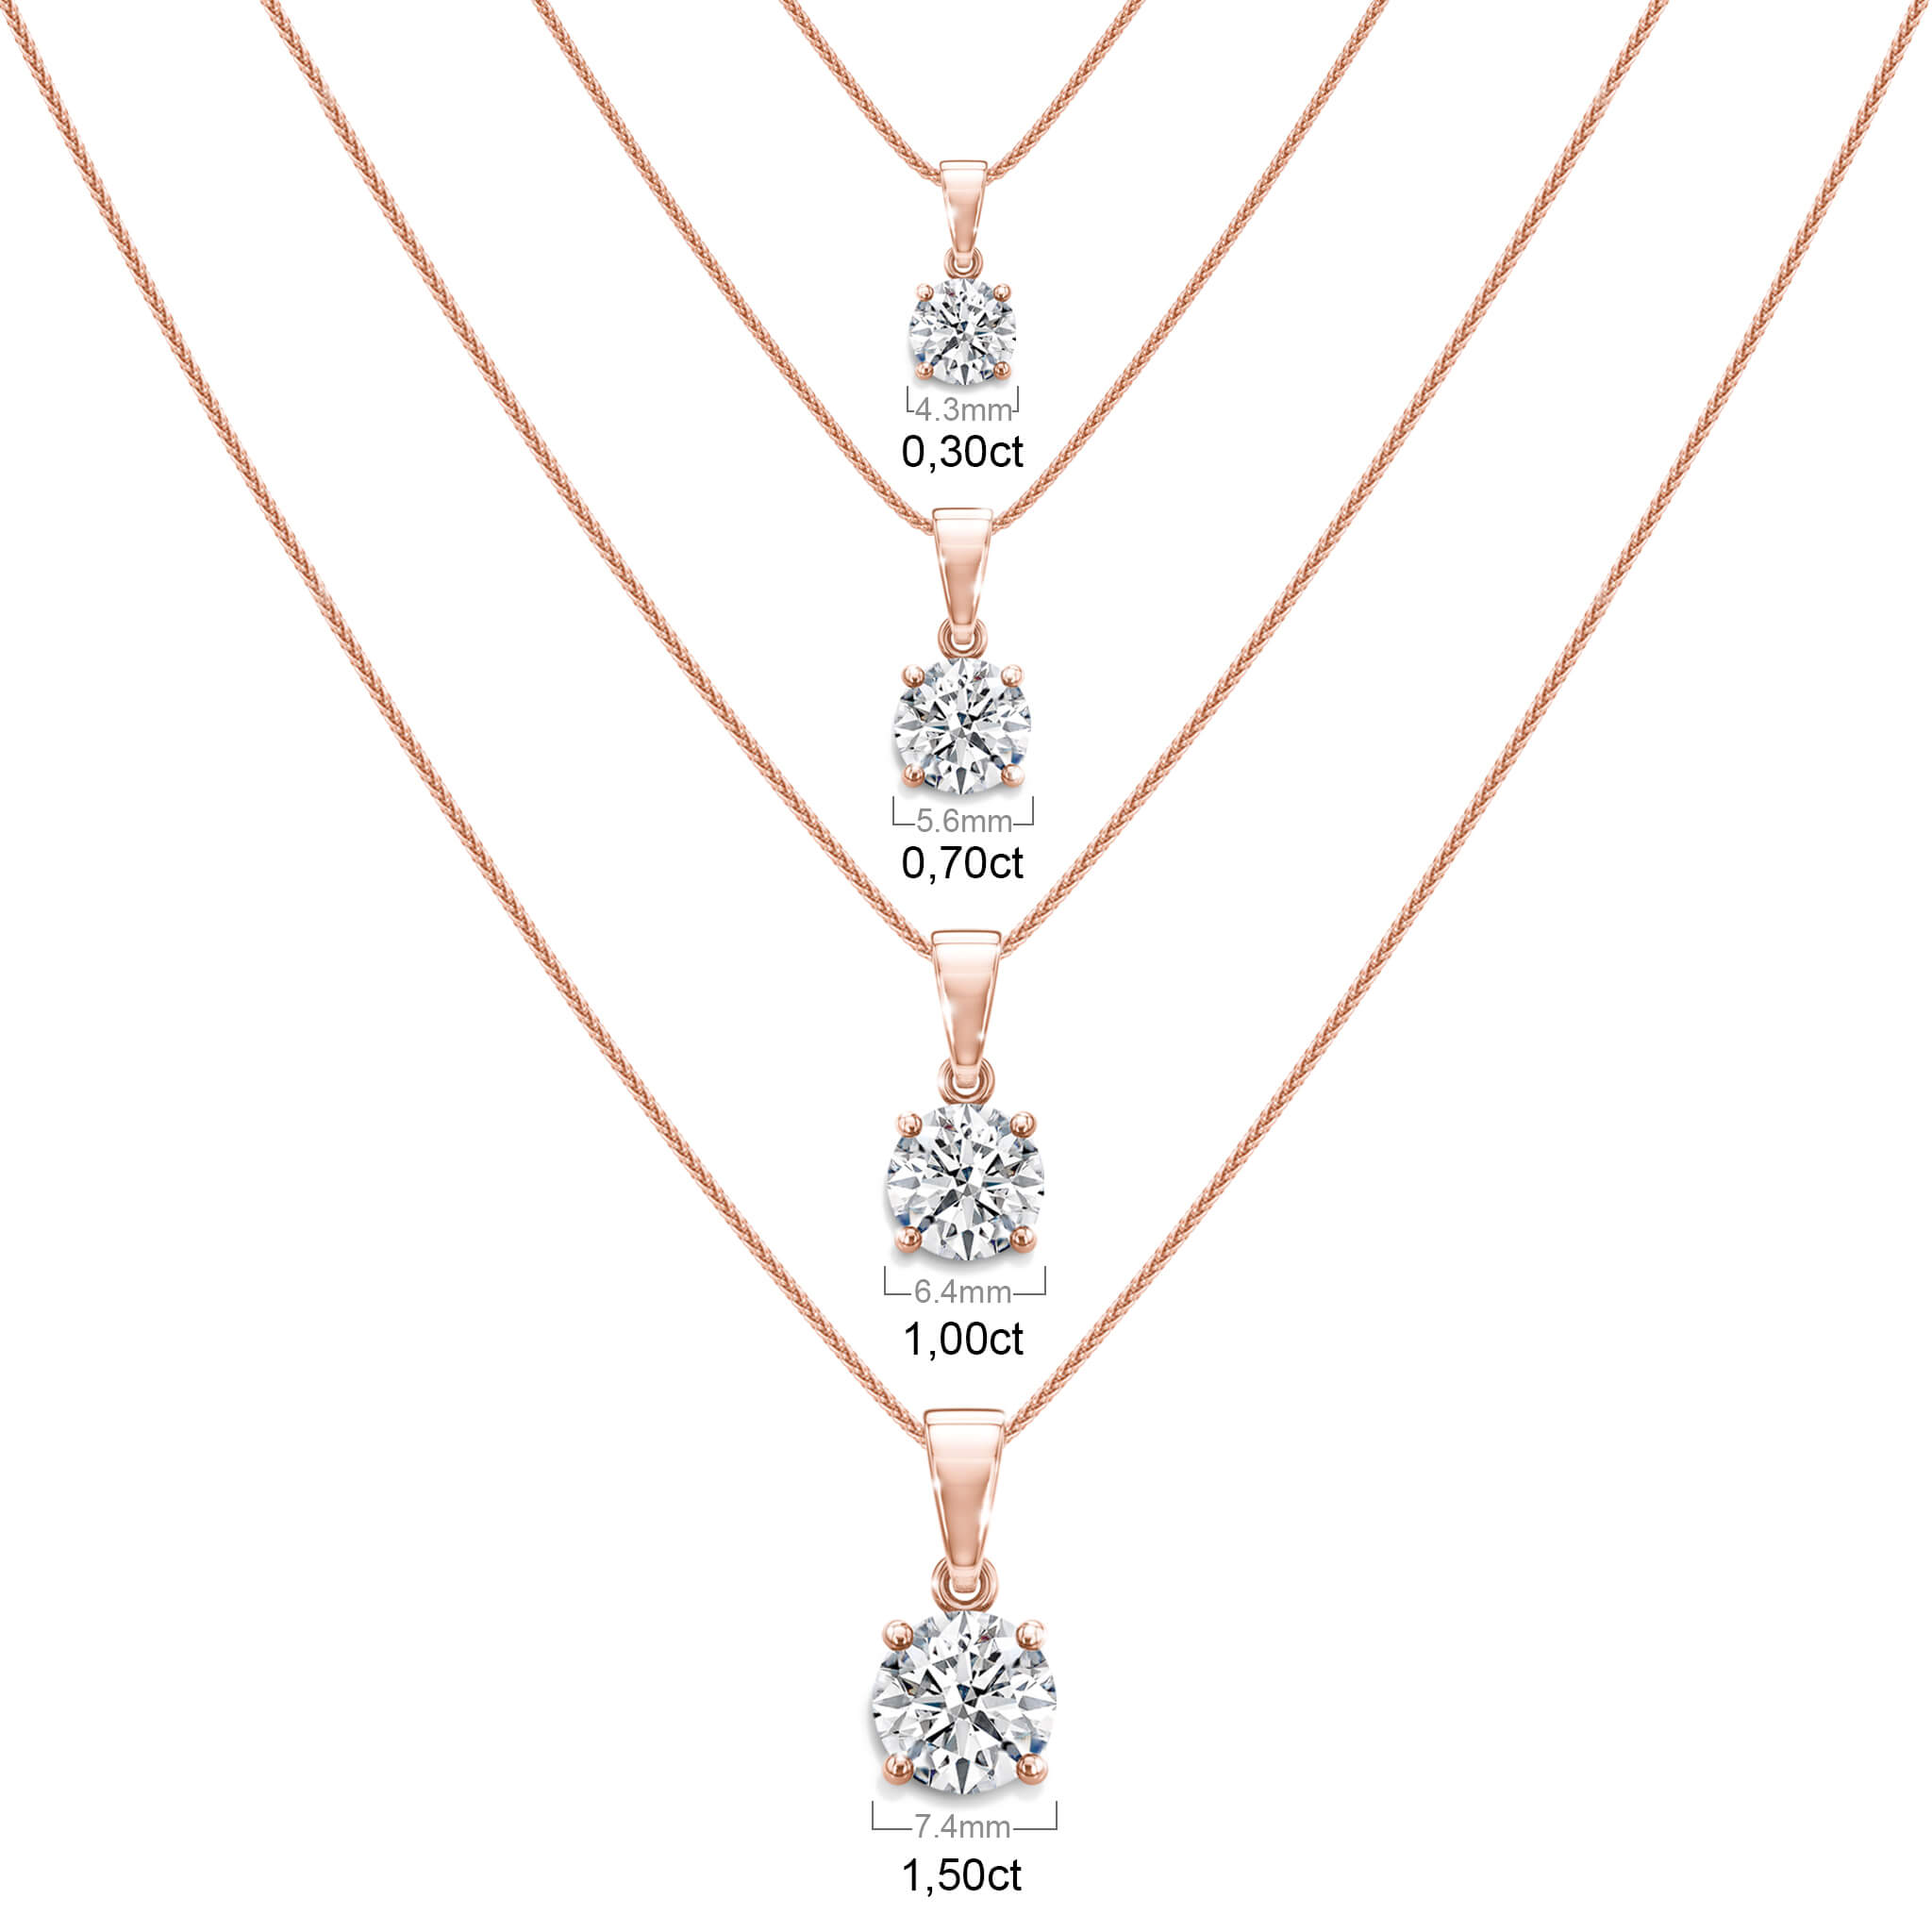 Shimansky - Women Wearing the 4 Claw Solitaire Diamond Pendant 1.00ct crafted in 18K Rose Gold - Size Chart